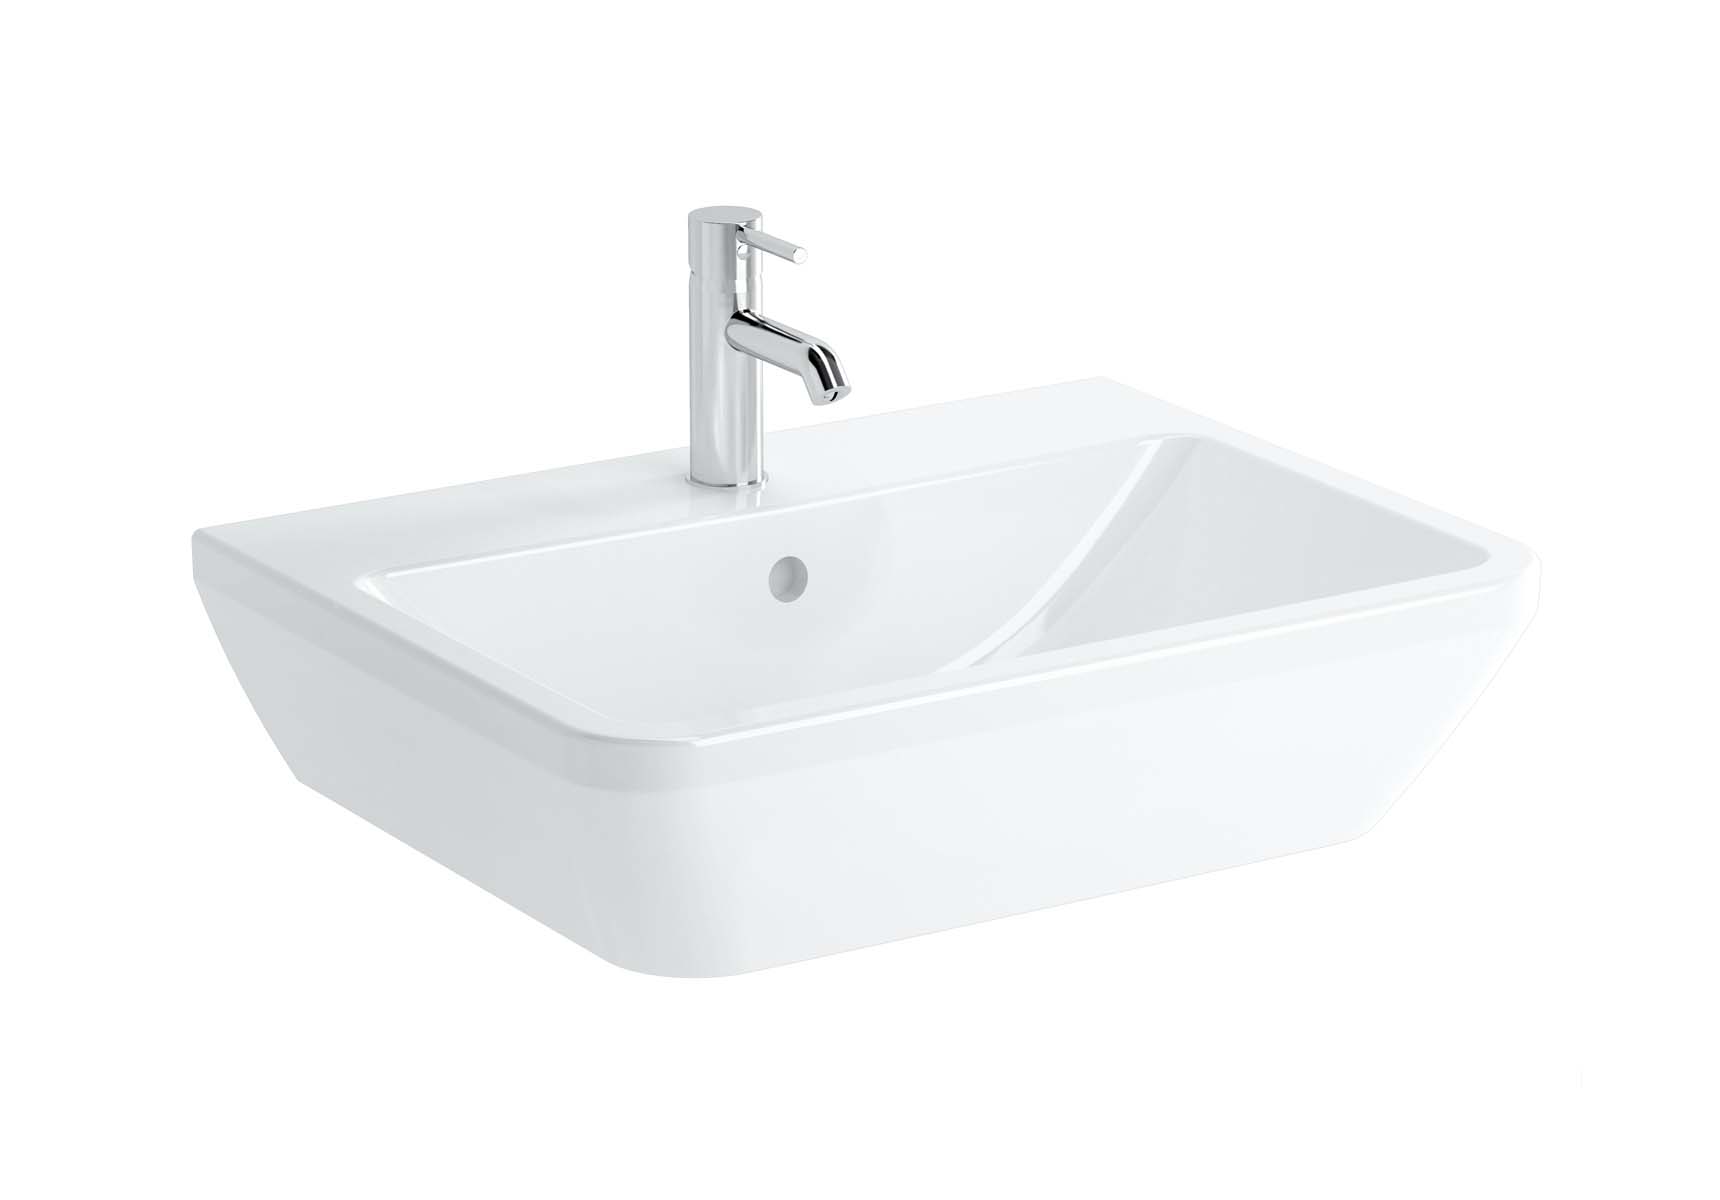 Square Washbasin, 65 cm, One Tap Hole, With Overflow Hole